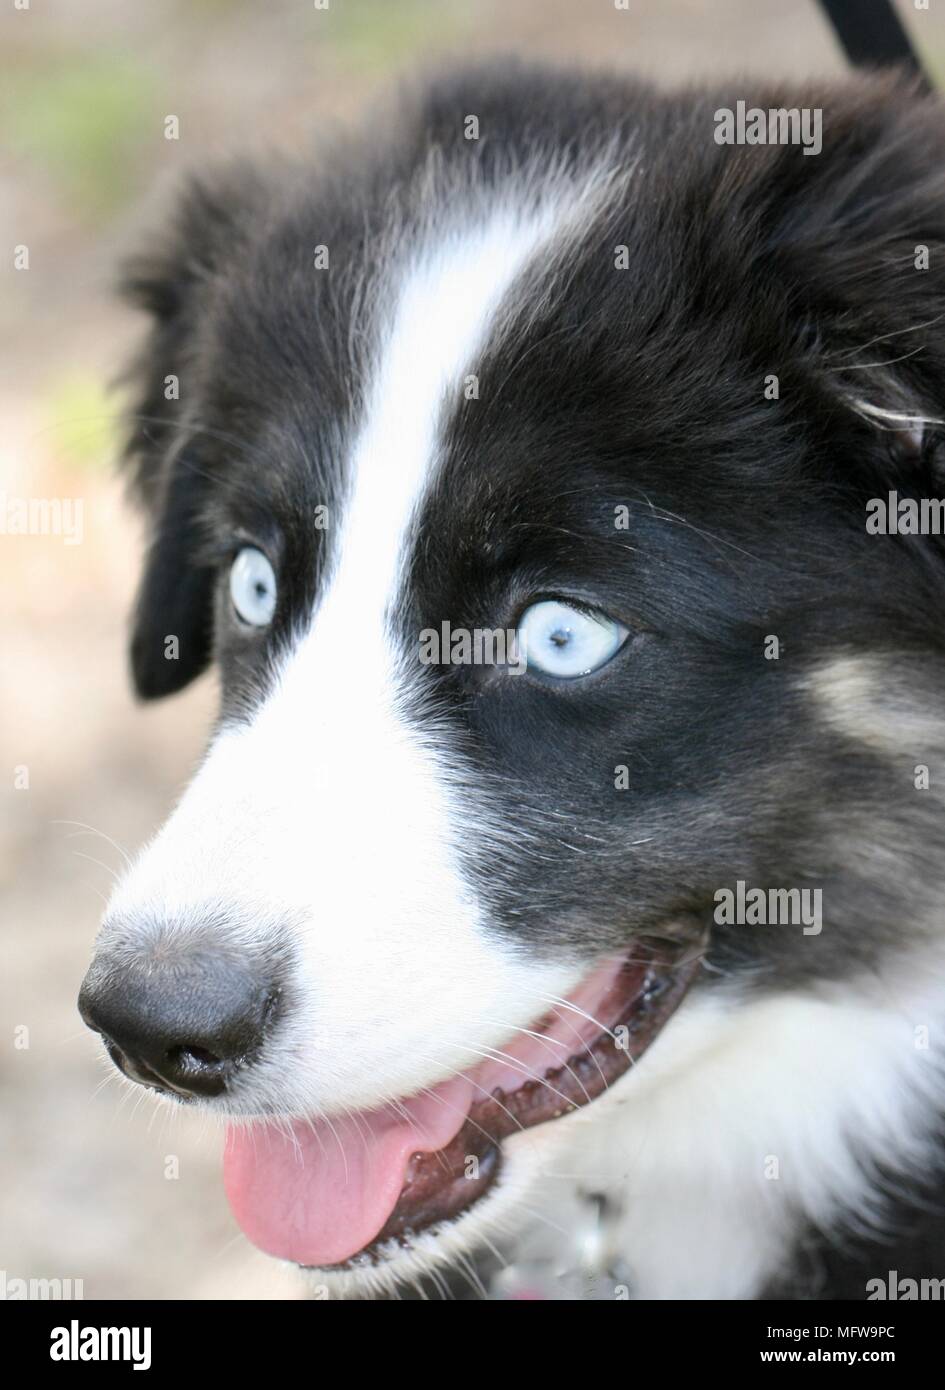 Black and white Australian Sheepdog with light blue eyes and opened mouth showing the tongue Stock Photo